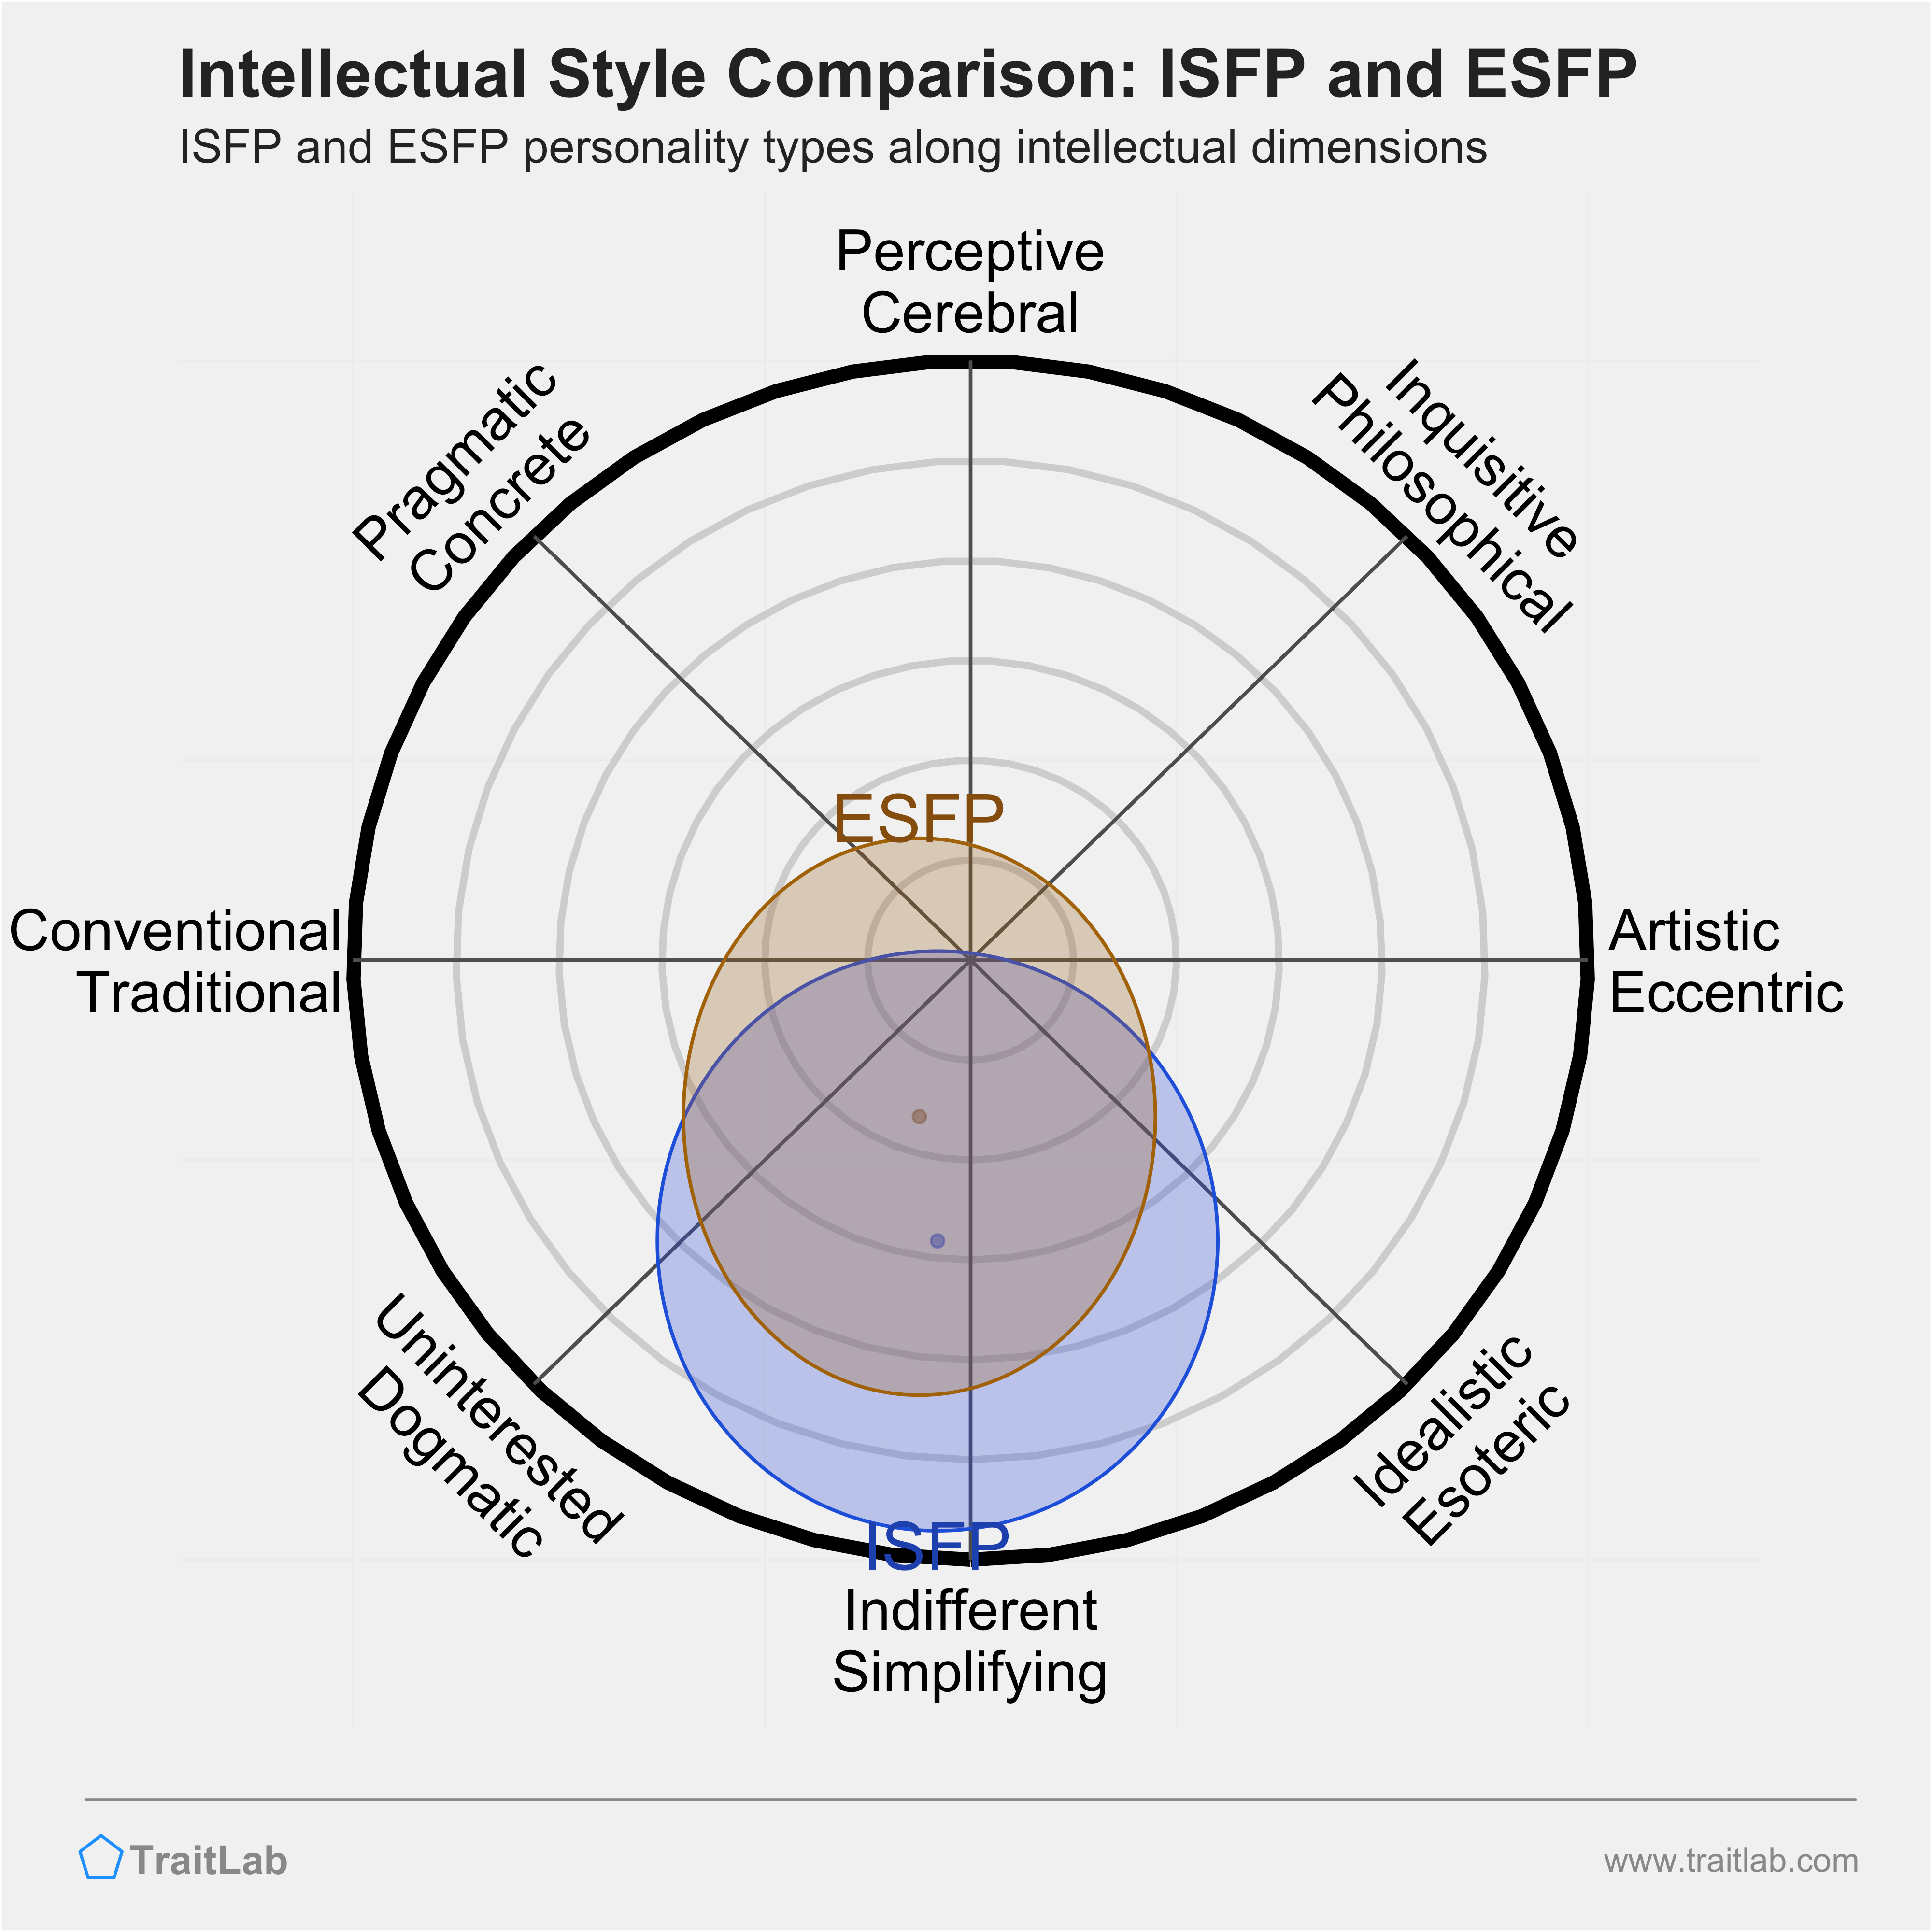 ISFP and ESFP comparison across intellectual dimensions